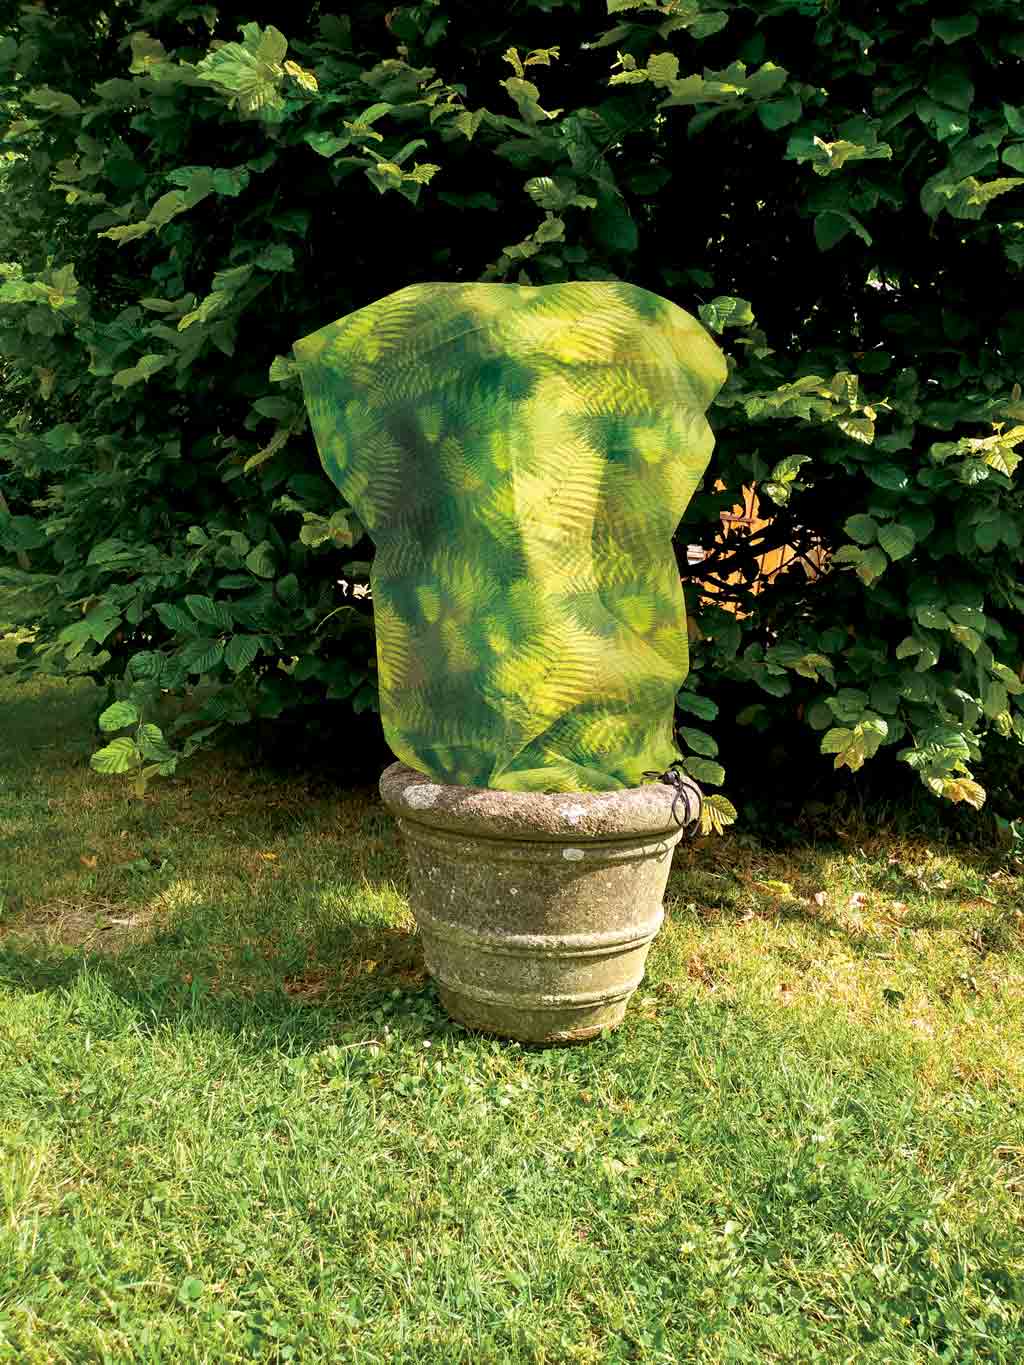 Green Ferne / Camouflage Fleece Jacket size small in use on potted plant in garden 